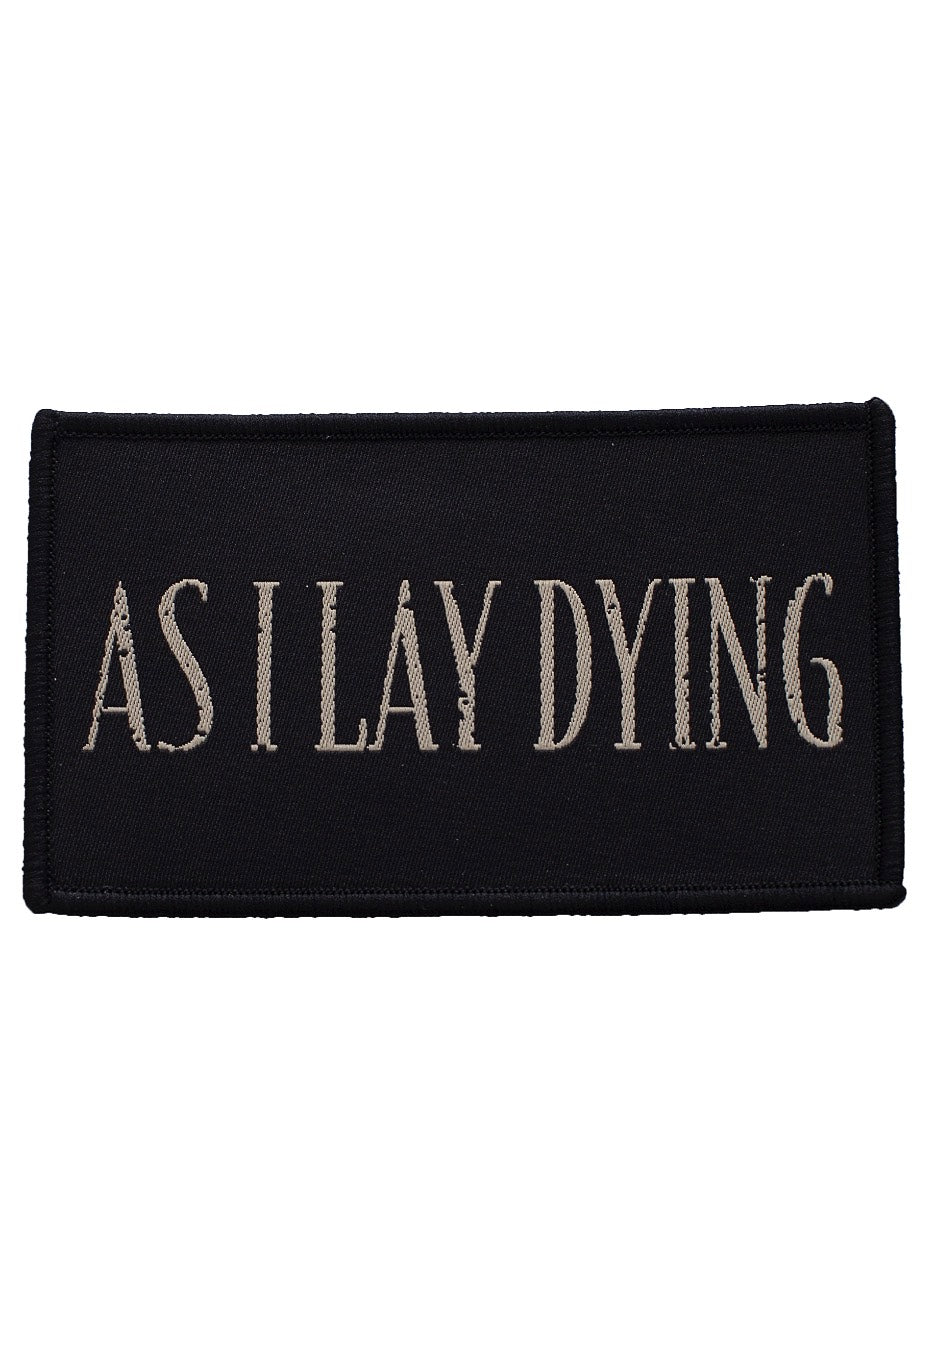 As I Lay Dying - Logo - Patch